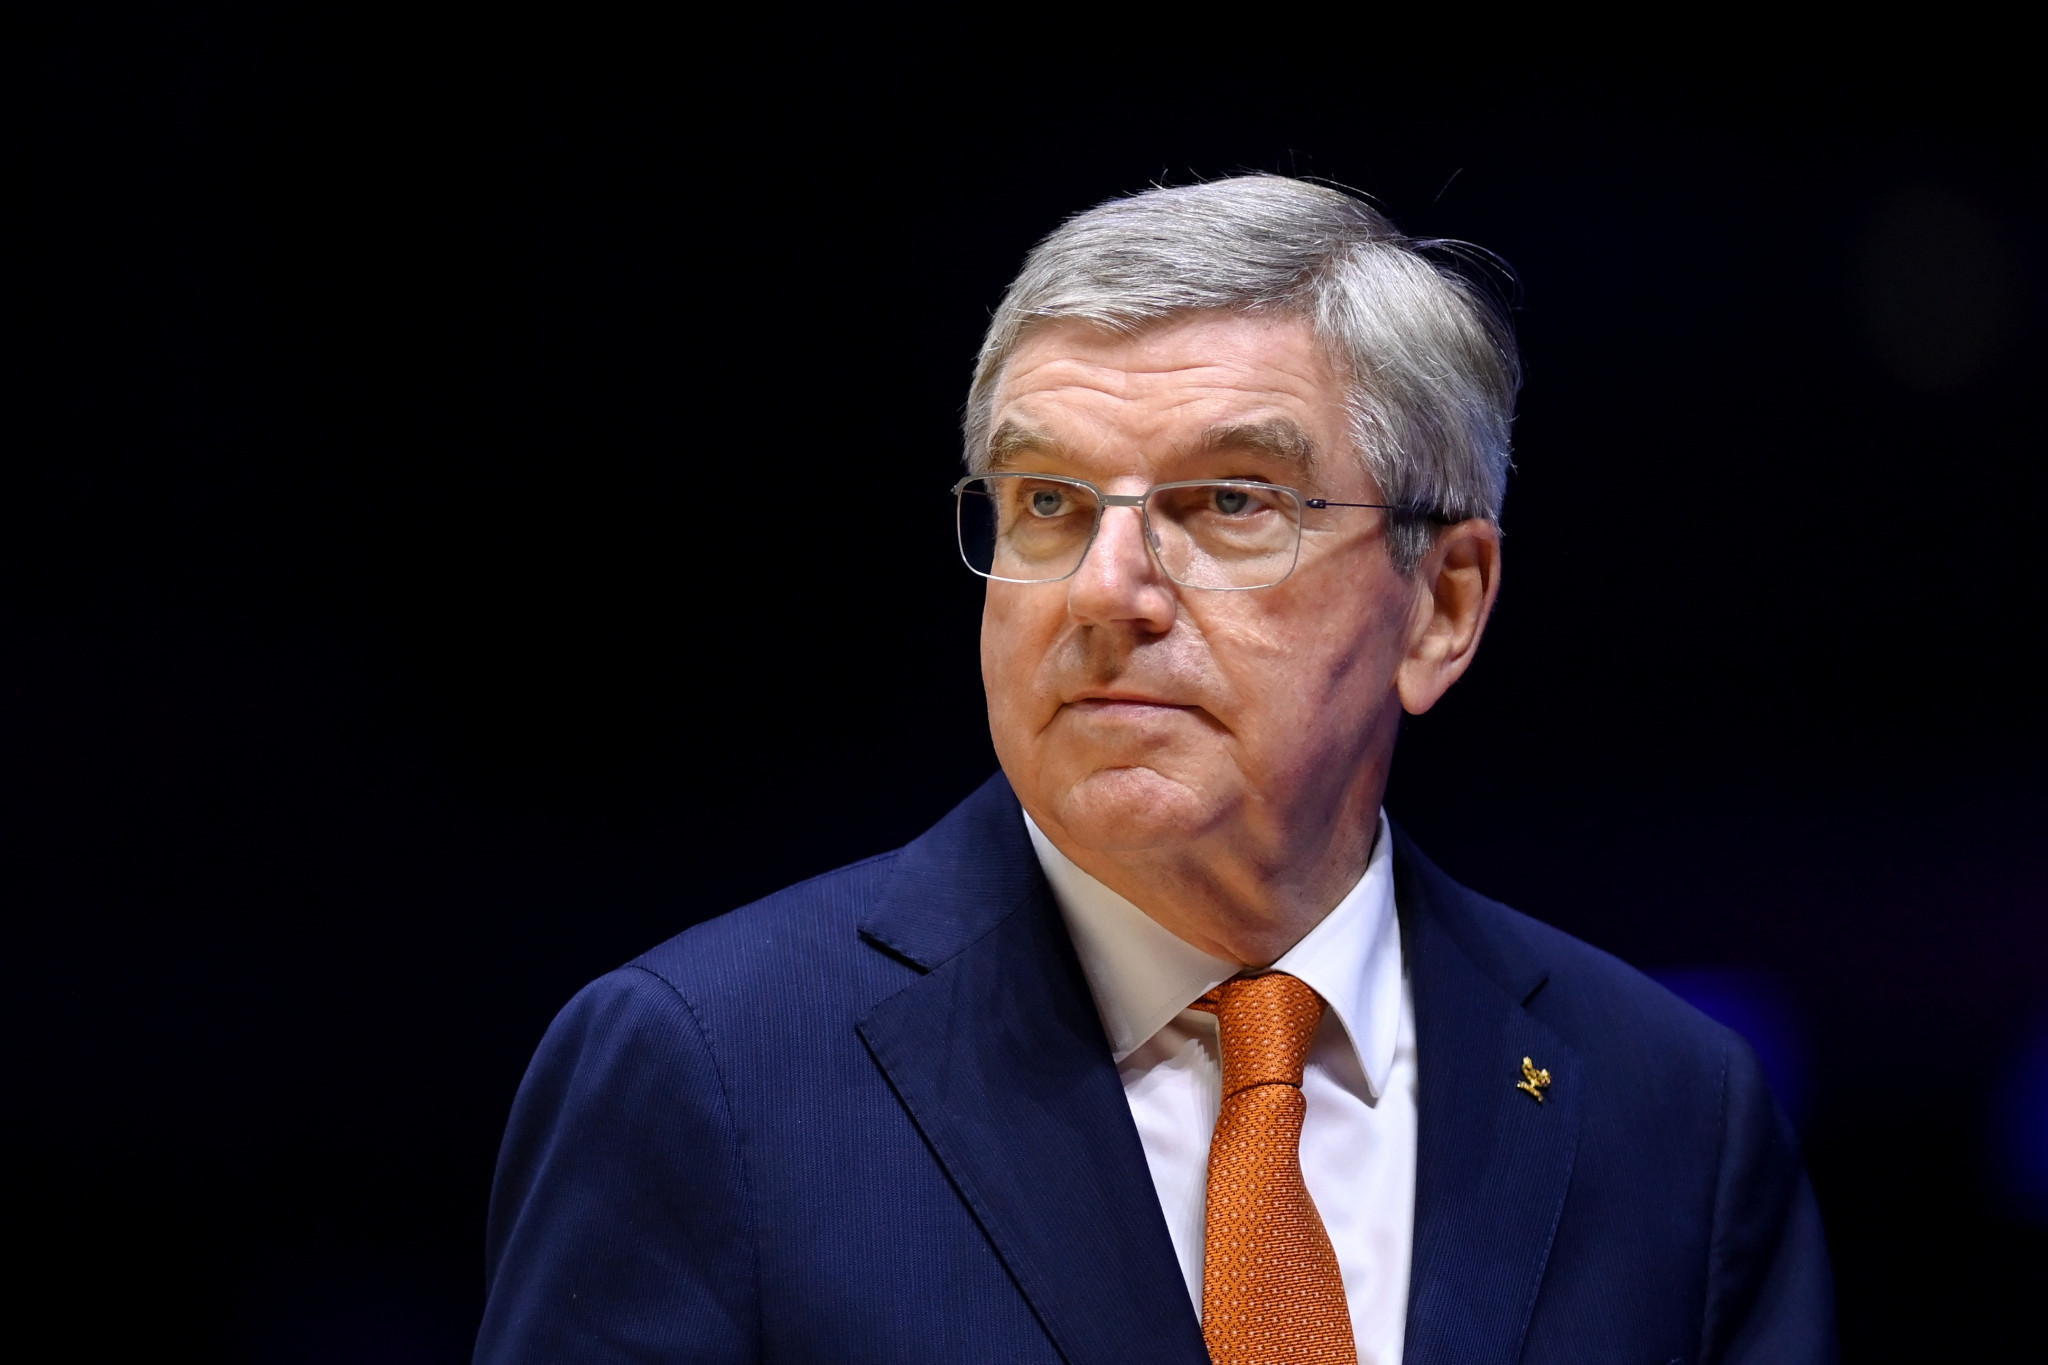 Thomas Bach has received criticism for the idea of allowing Russian and and Belarusian athletes to compete under a neutral flag ©Getty Images